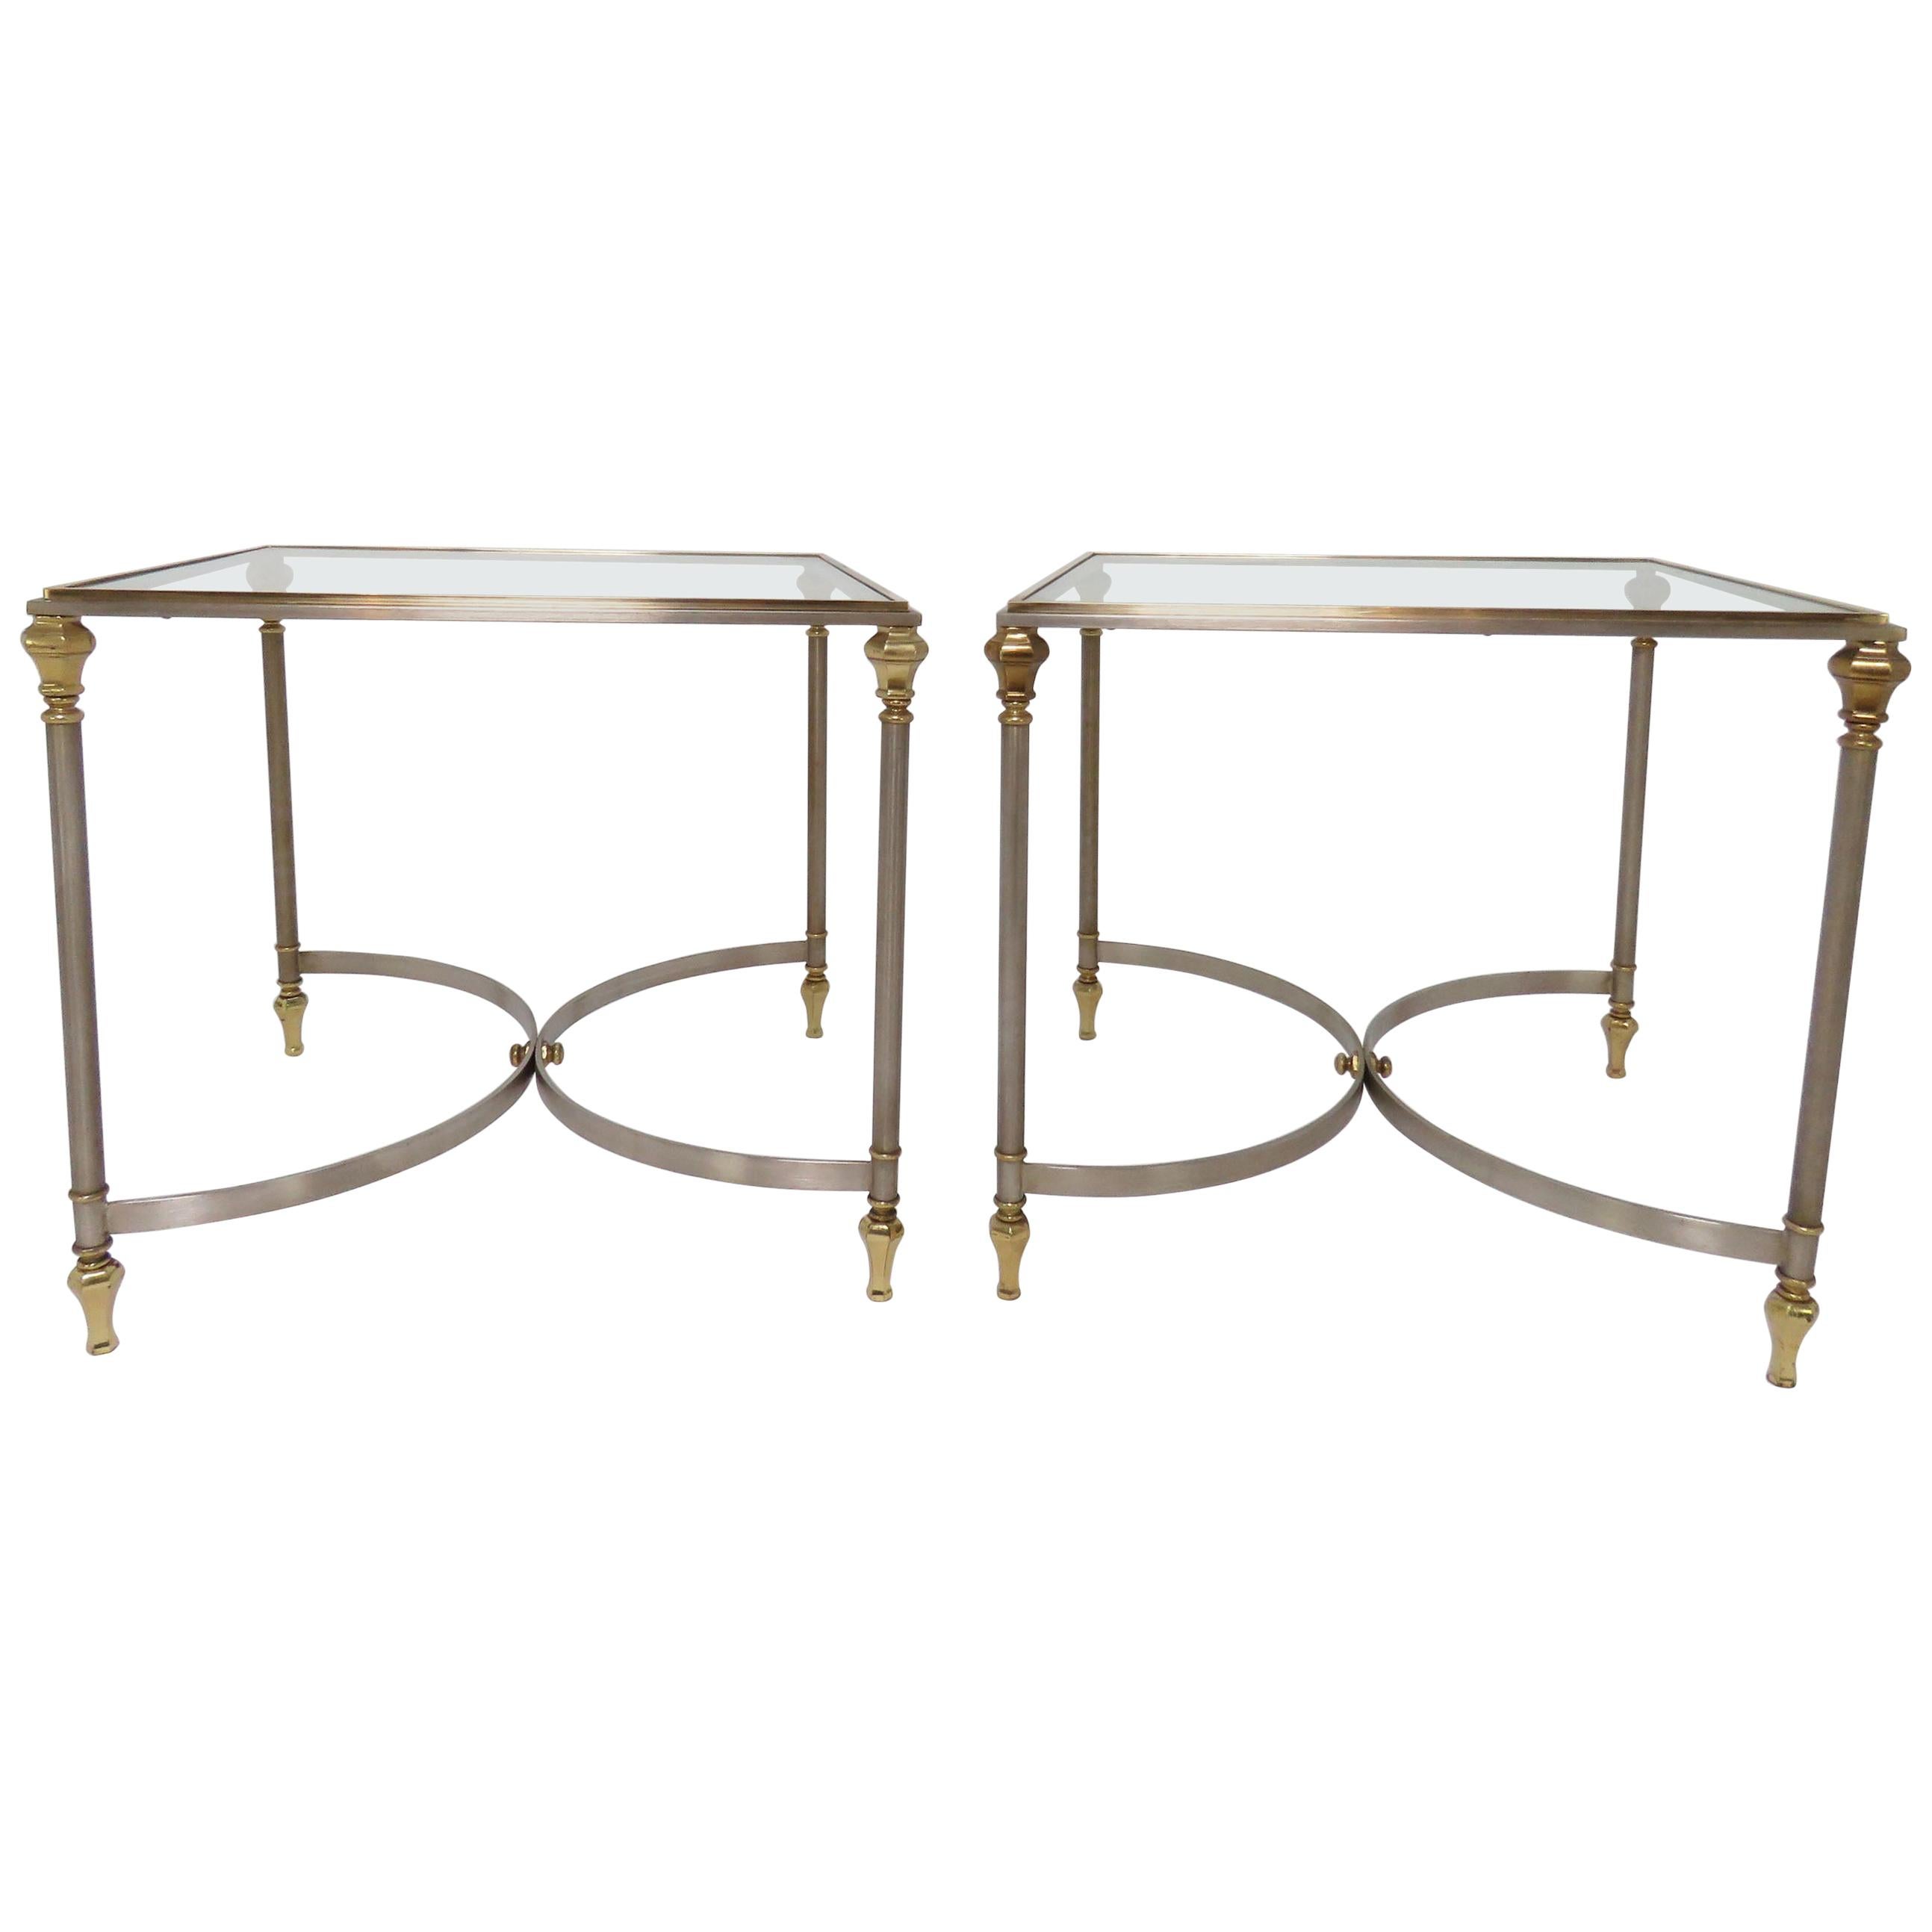 Pair of Maison Jansen Style Mixed Metal Side Tables, Made in Italy, circa 1960s